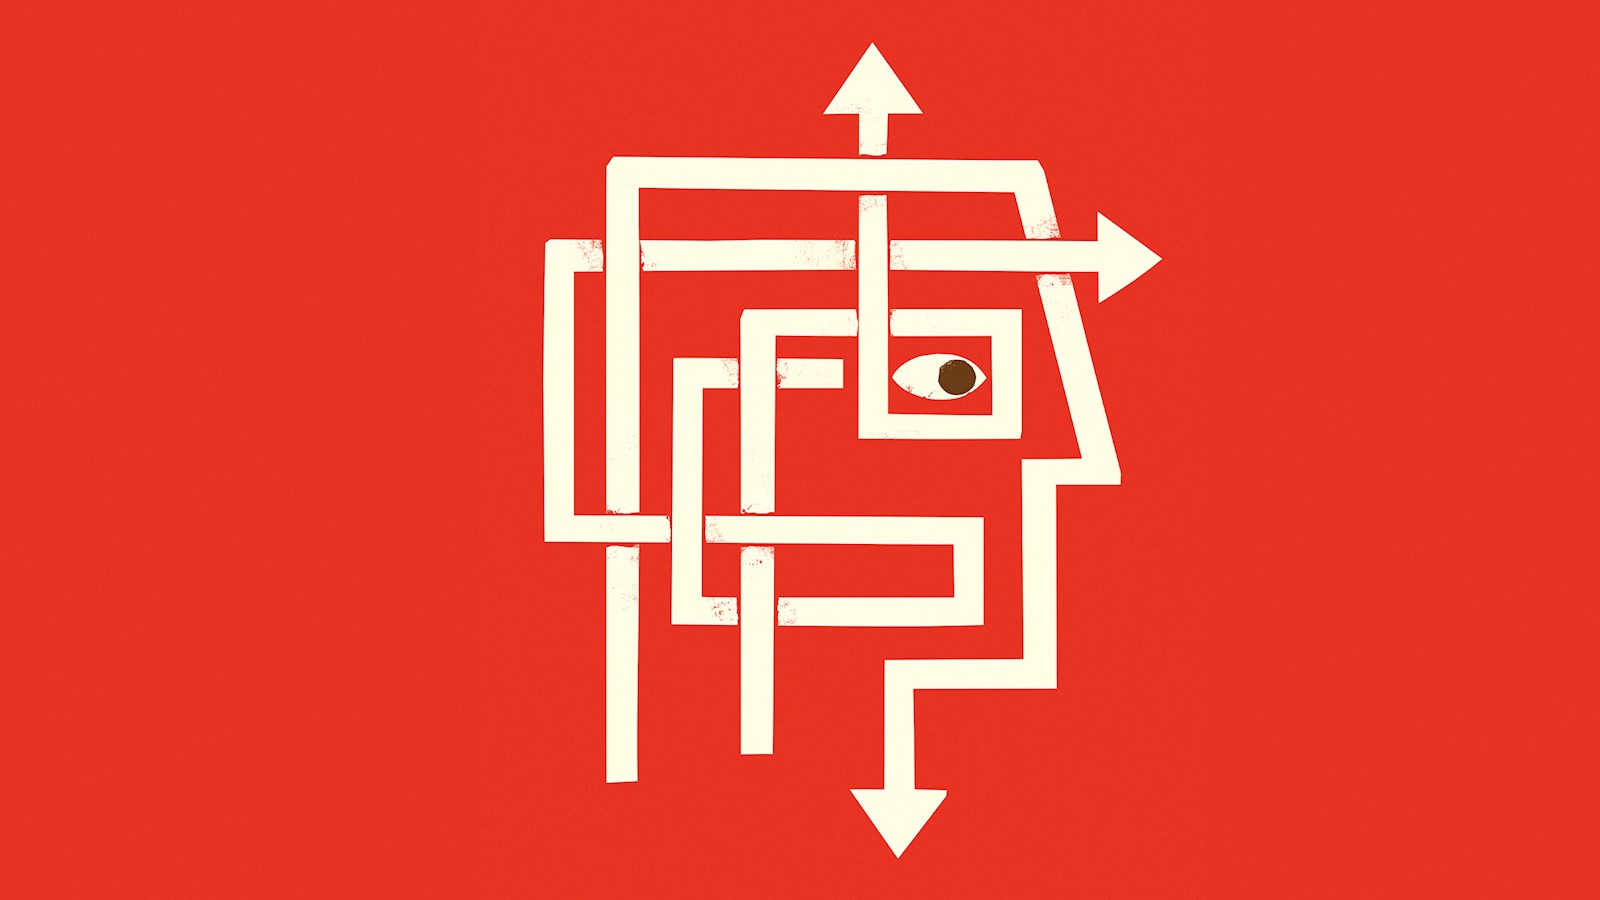 Outline of a face made out of arrows on red background